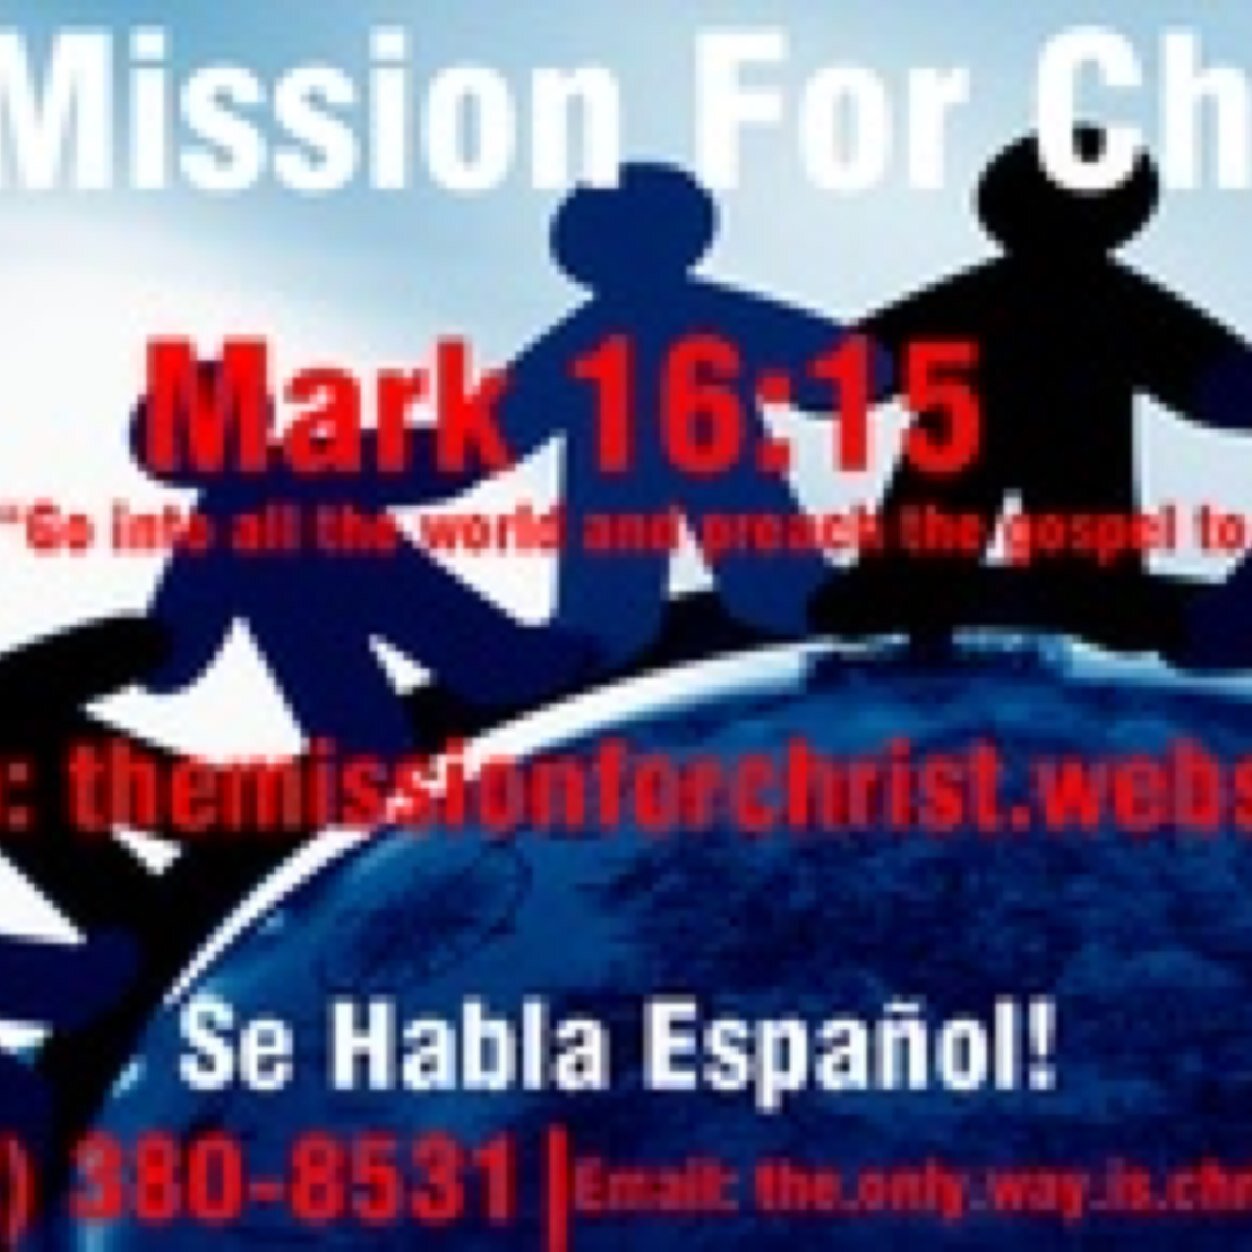 We are a Non-Profit organization wanting to reach out to people for Christ, Office: (602)-380-8531 Website: http://t.co/Re20IpmFcC Se Habla Español